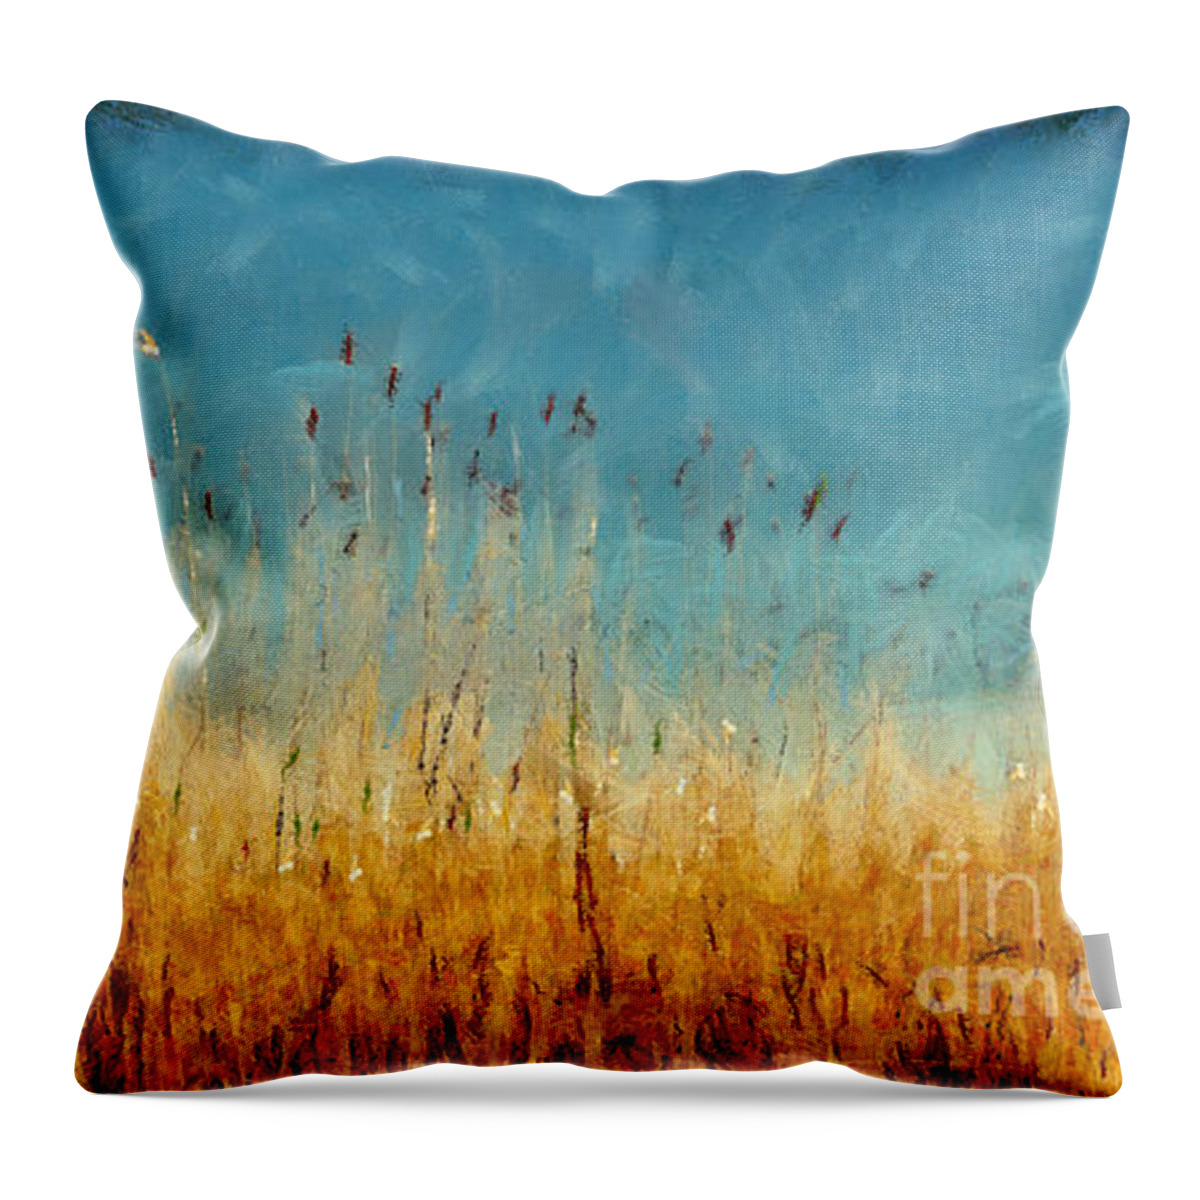 Landscape Throw Pillow featuring the painting Reeds Lake Landscape Painting by Dimitar Hristov